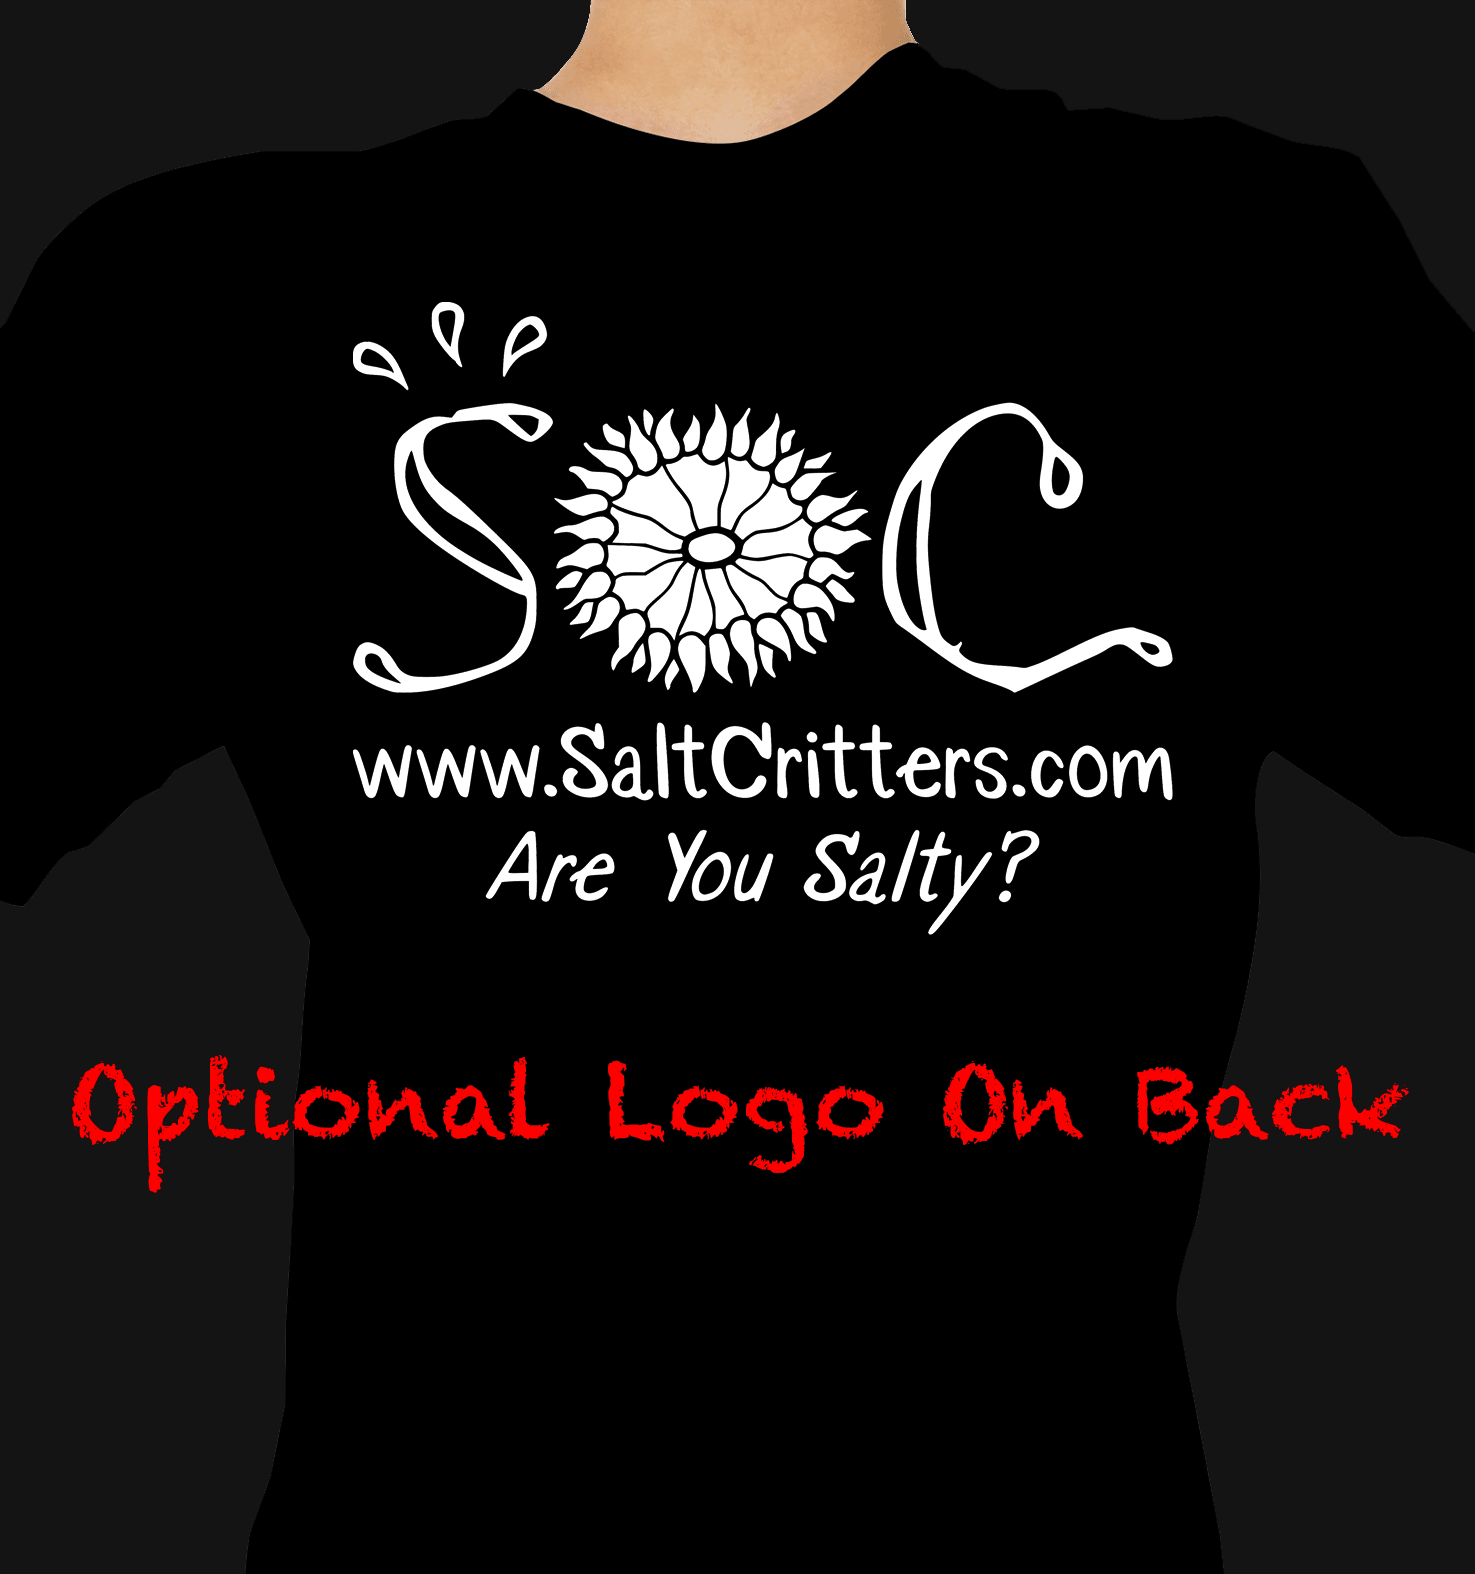 Can't Buy Happiness T-Shirt Black - SaltCritters